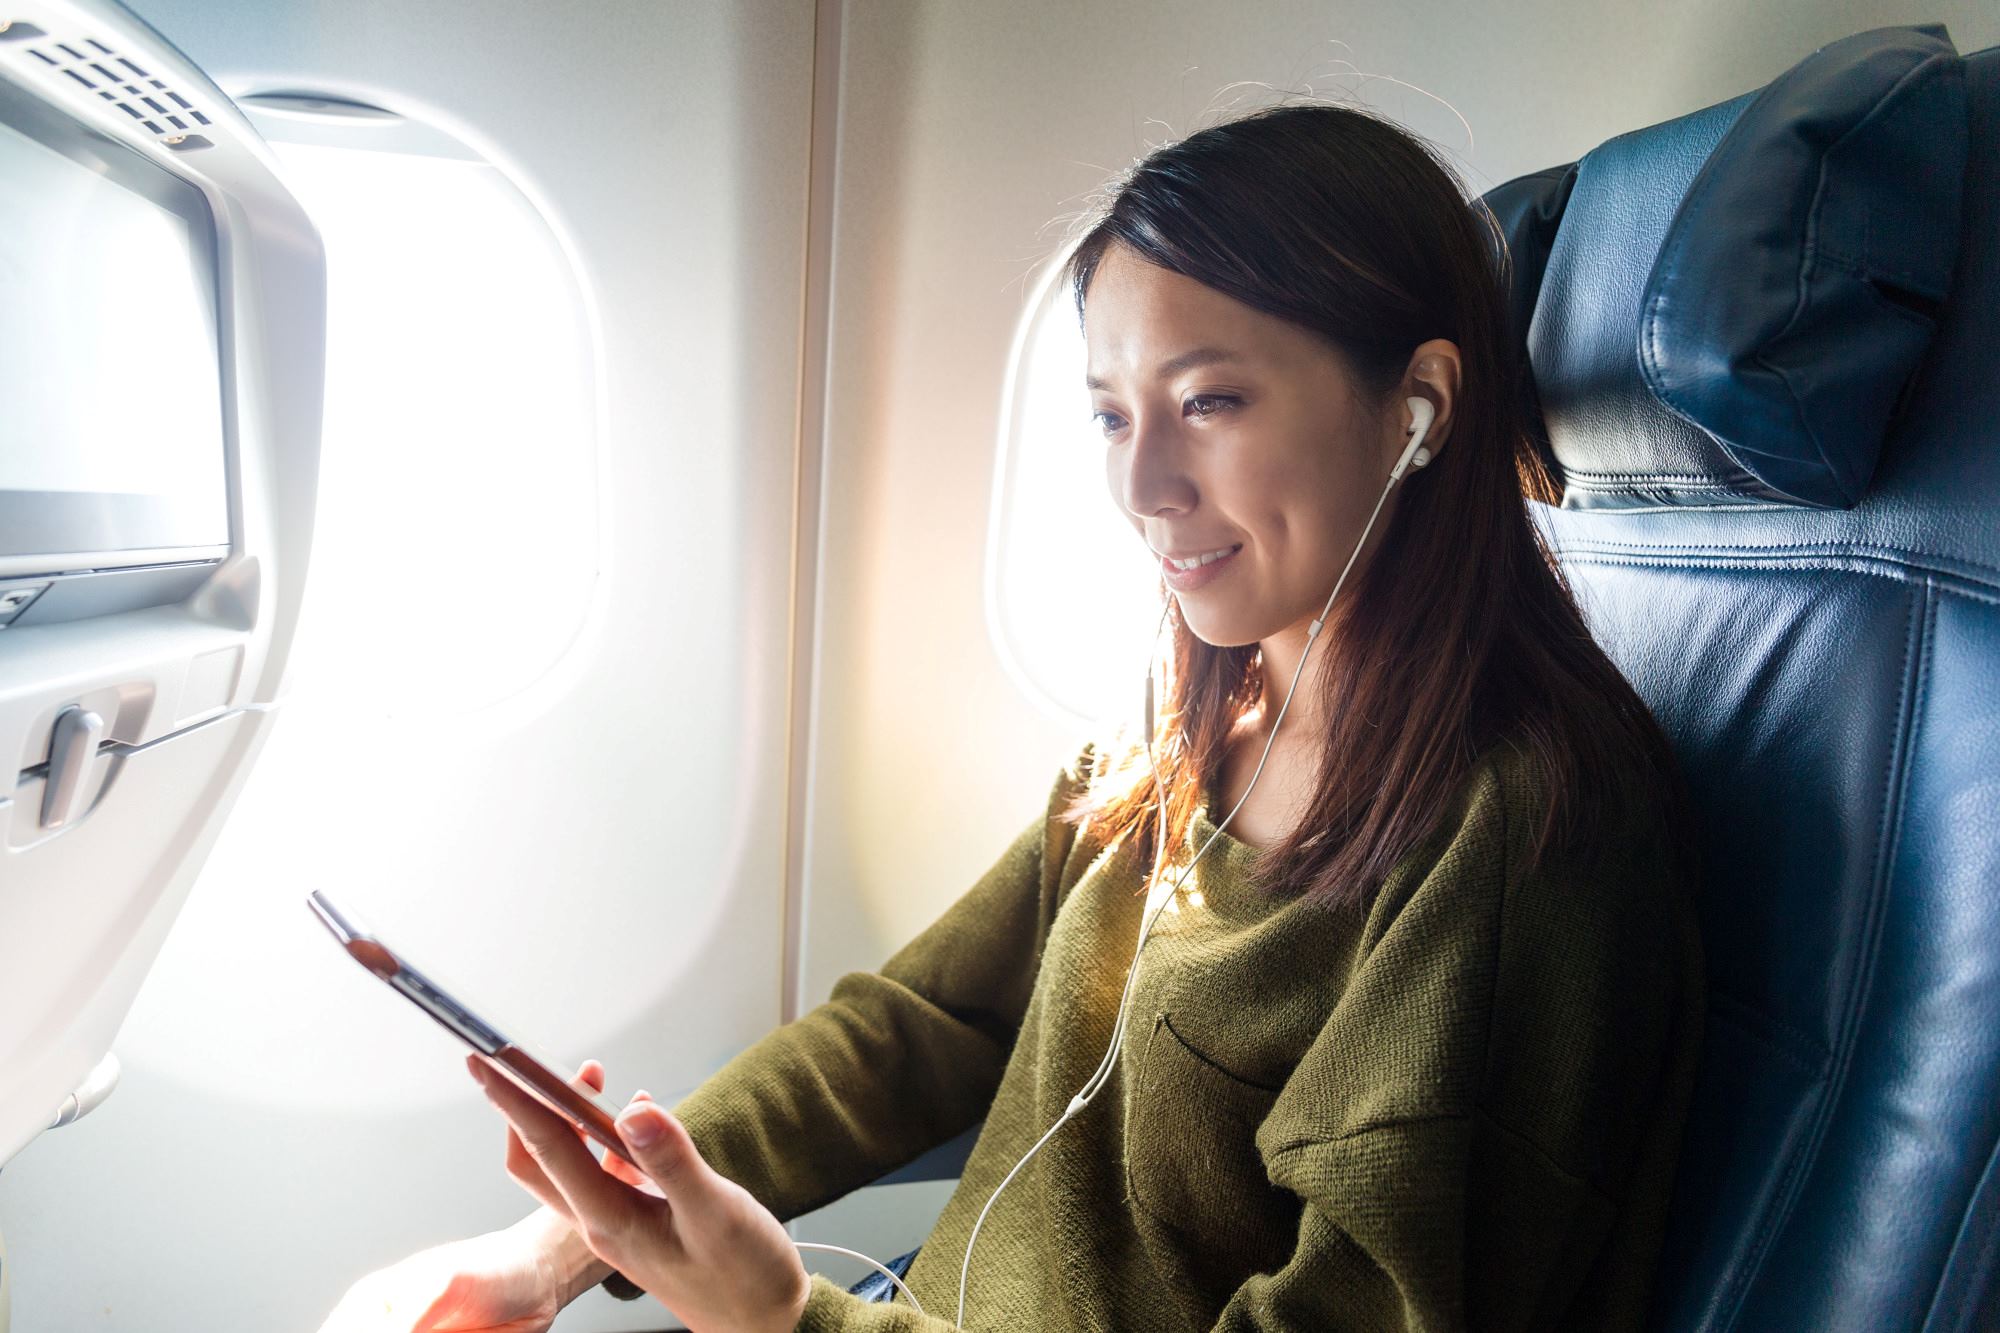 How To Download Movies On IPad To Watch On Airplane